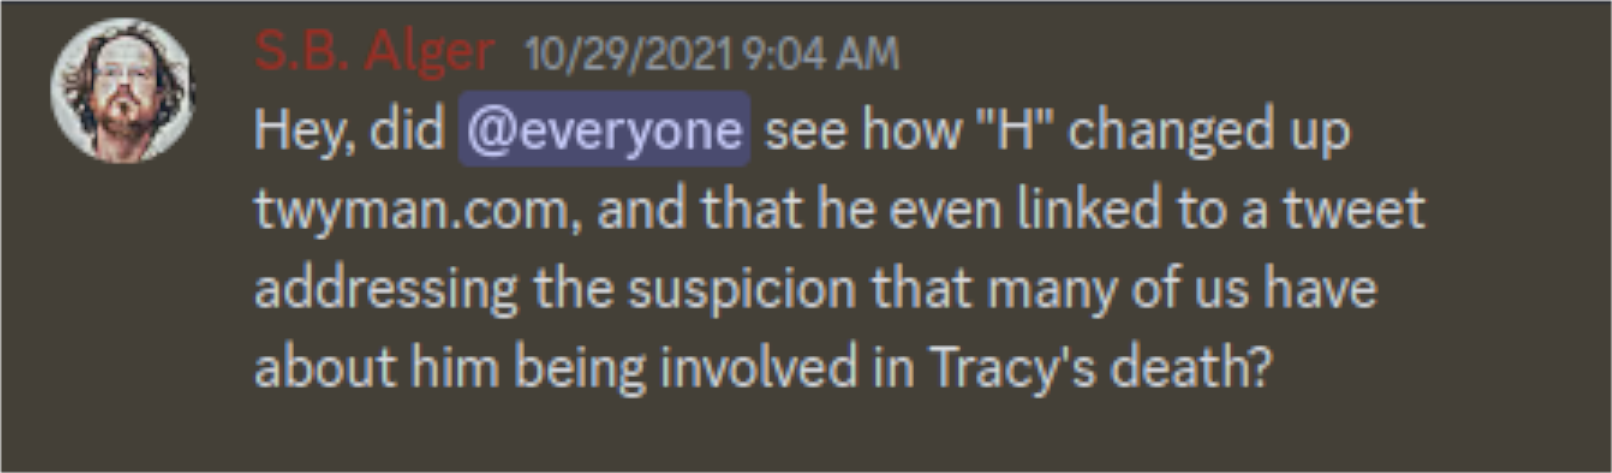 Discord Server: S. B. Alger @everyone: S.B. Alger 10.29/2021: Hey, did @everyone see how "H" changed up twyman.com, and that he even linked to a tweet addressing the suspicion that many of us have about him being involved in Tracy's death?